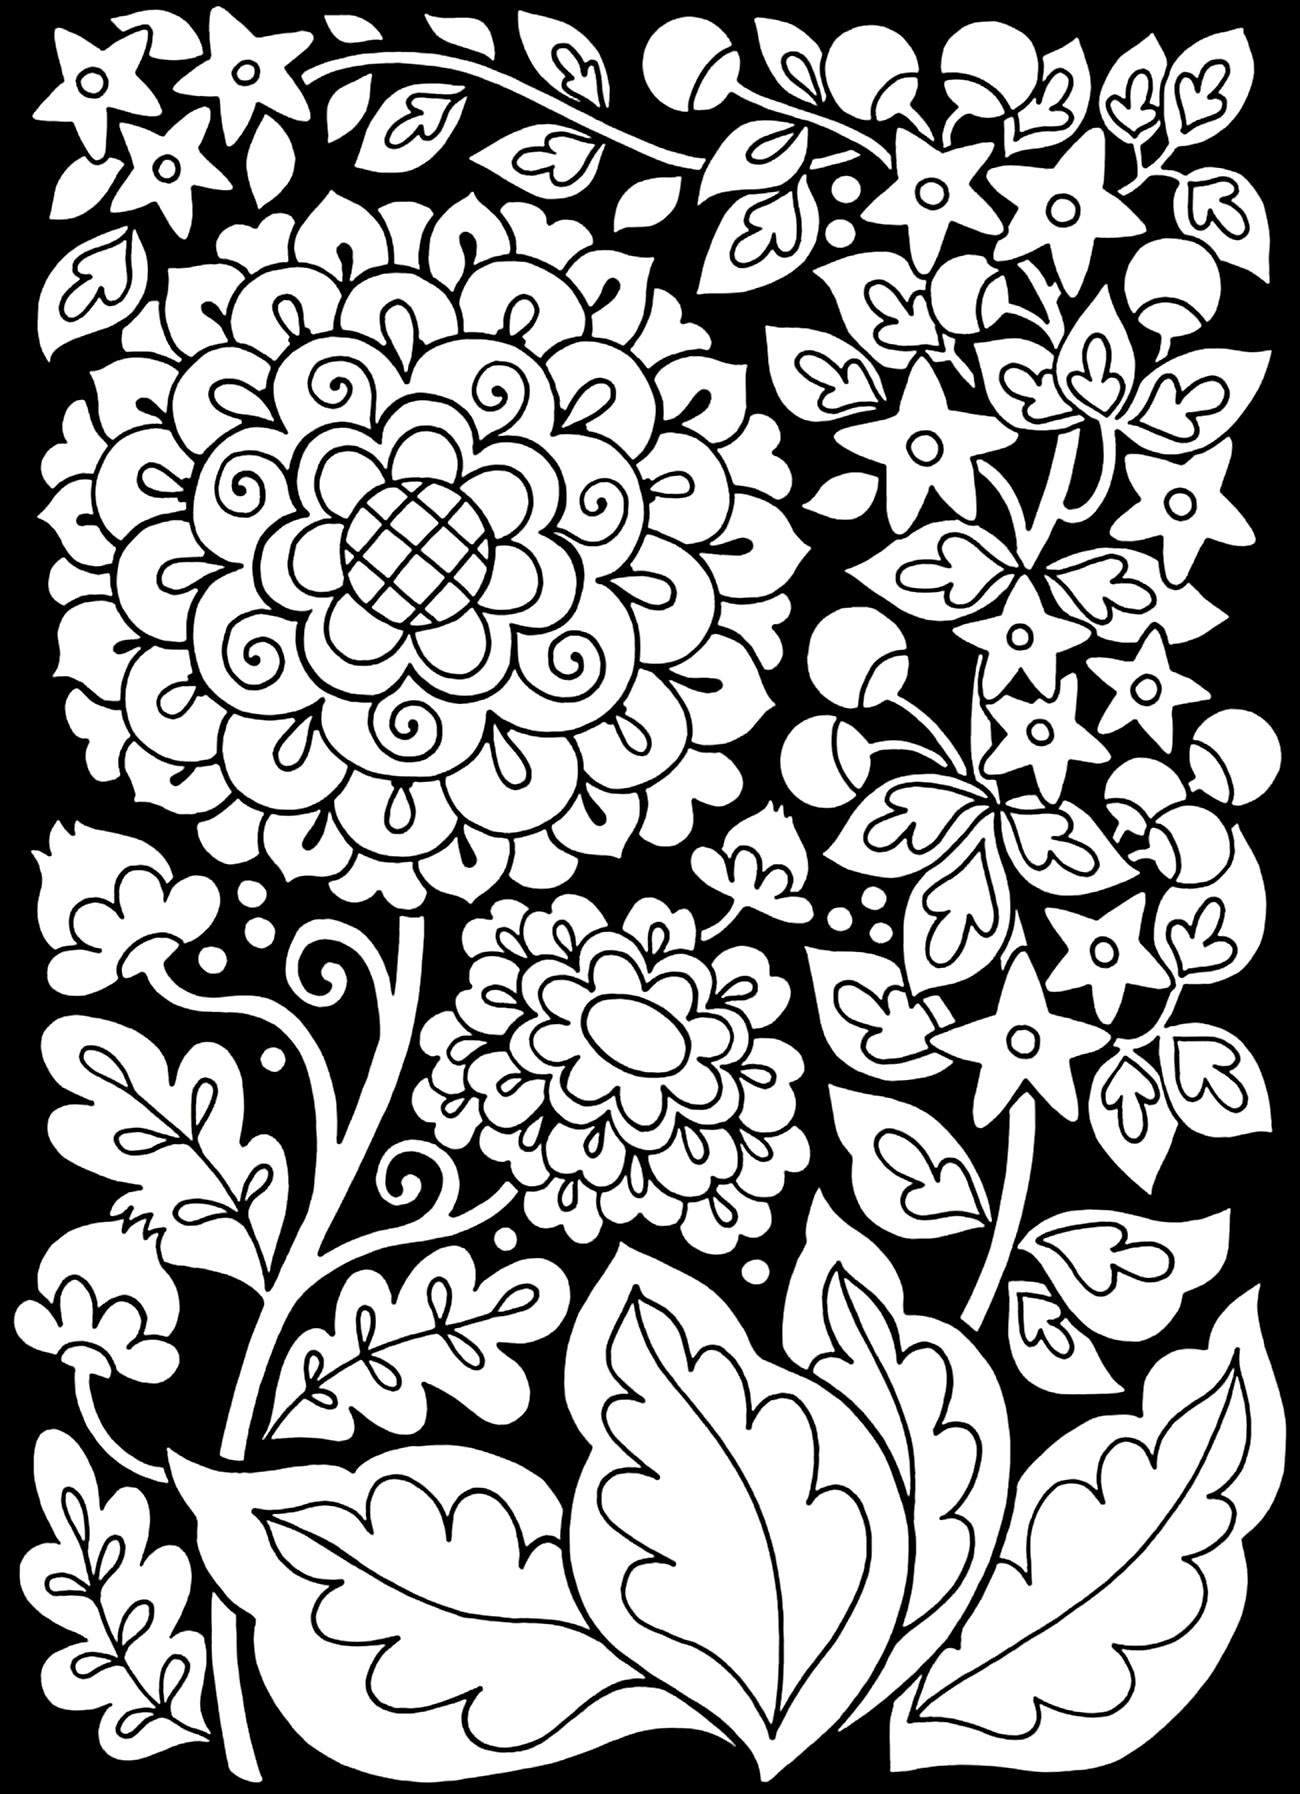 350 Cute Free Black And White Coloring Pages for Kindergarten